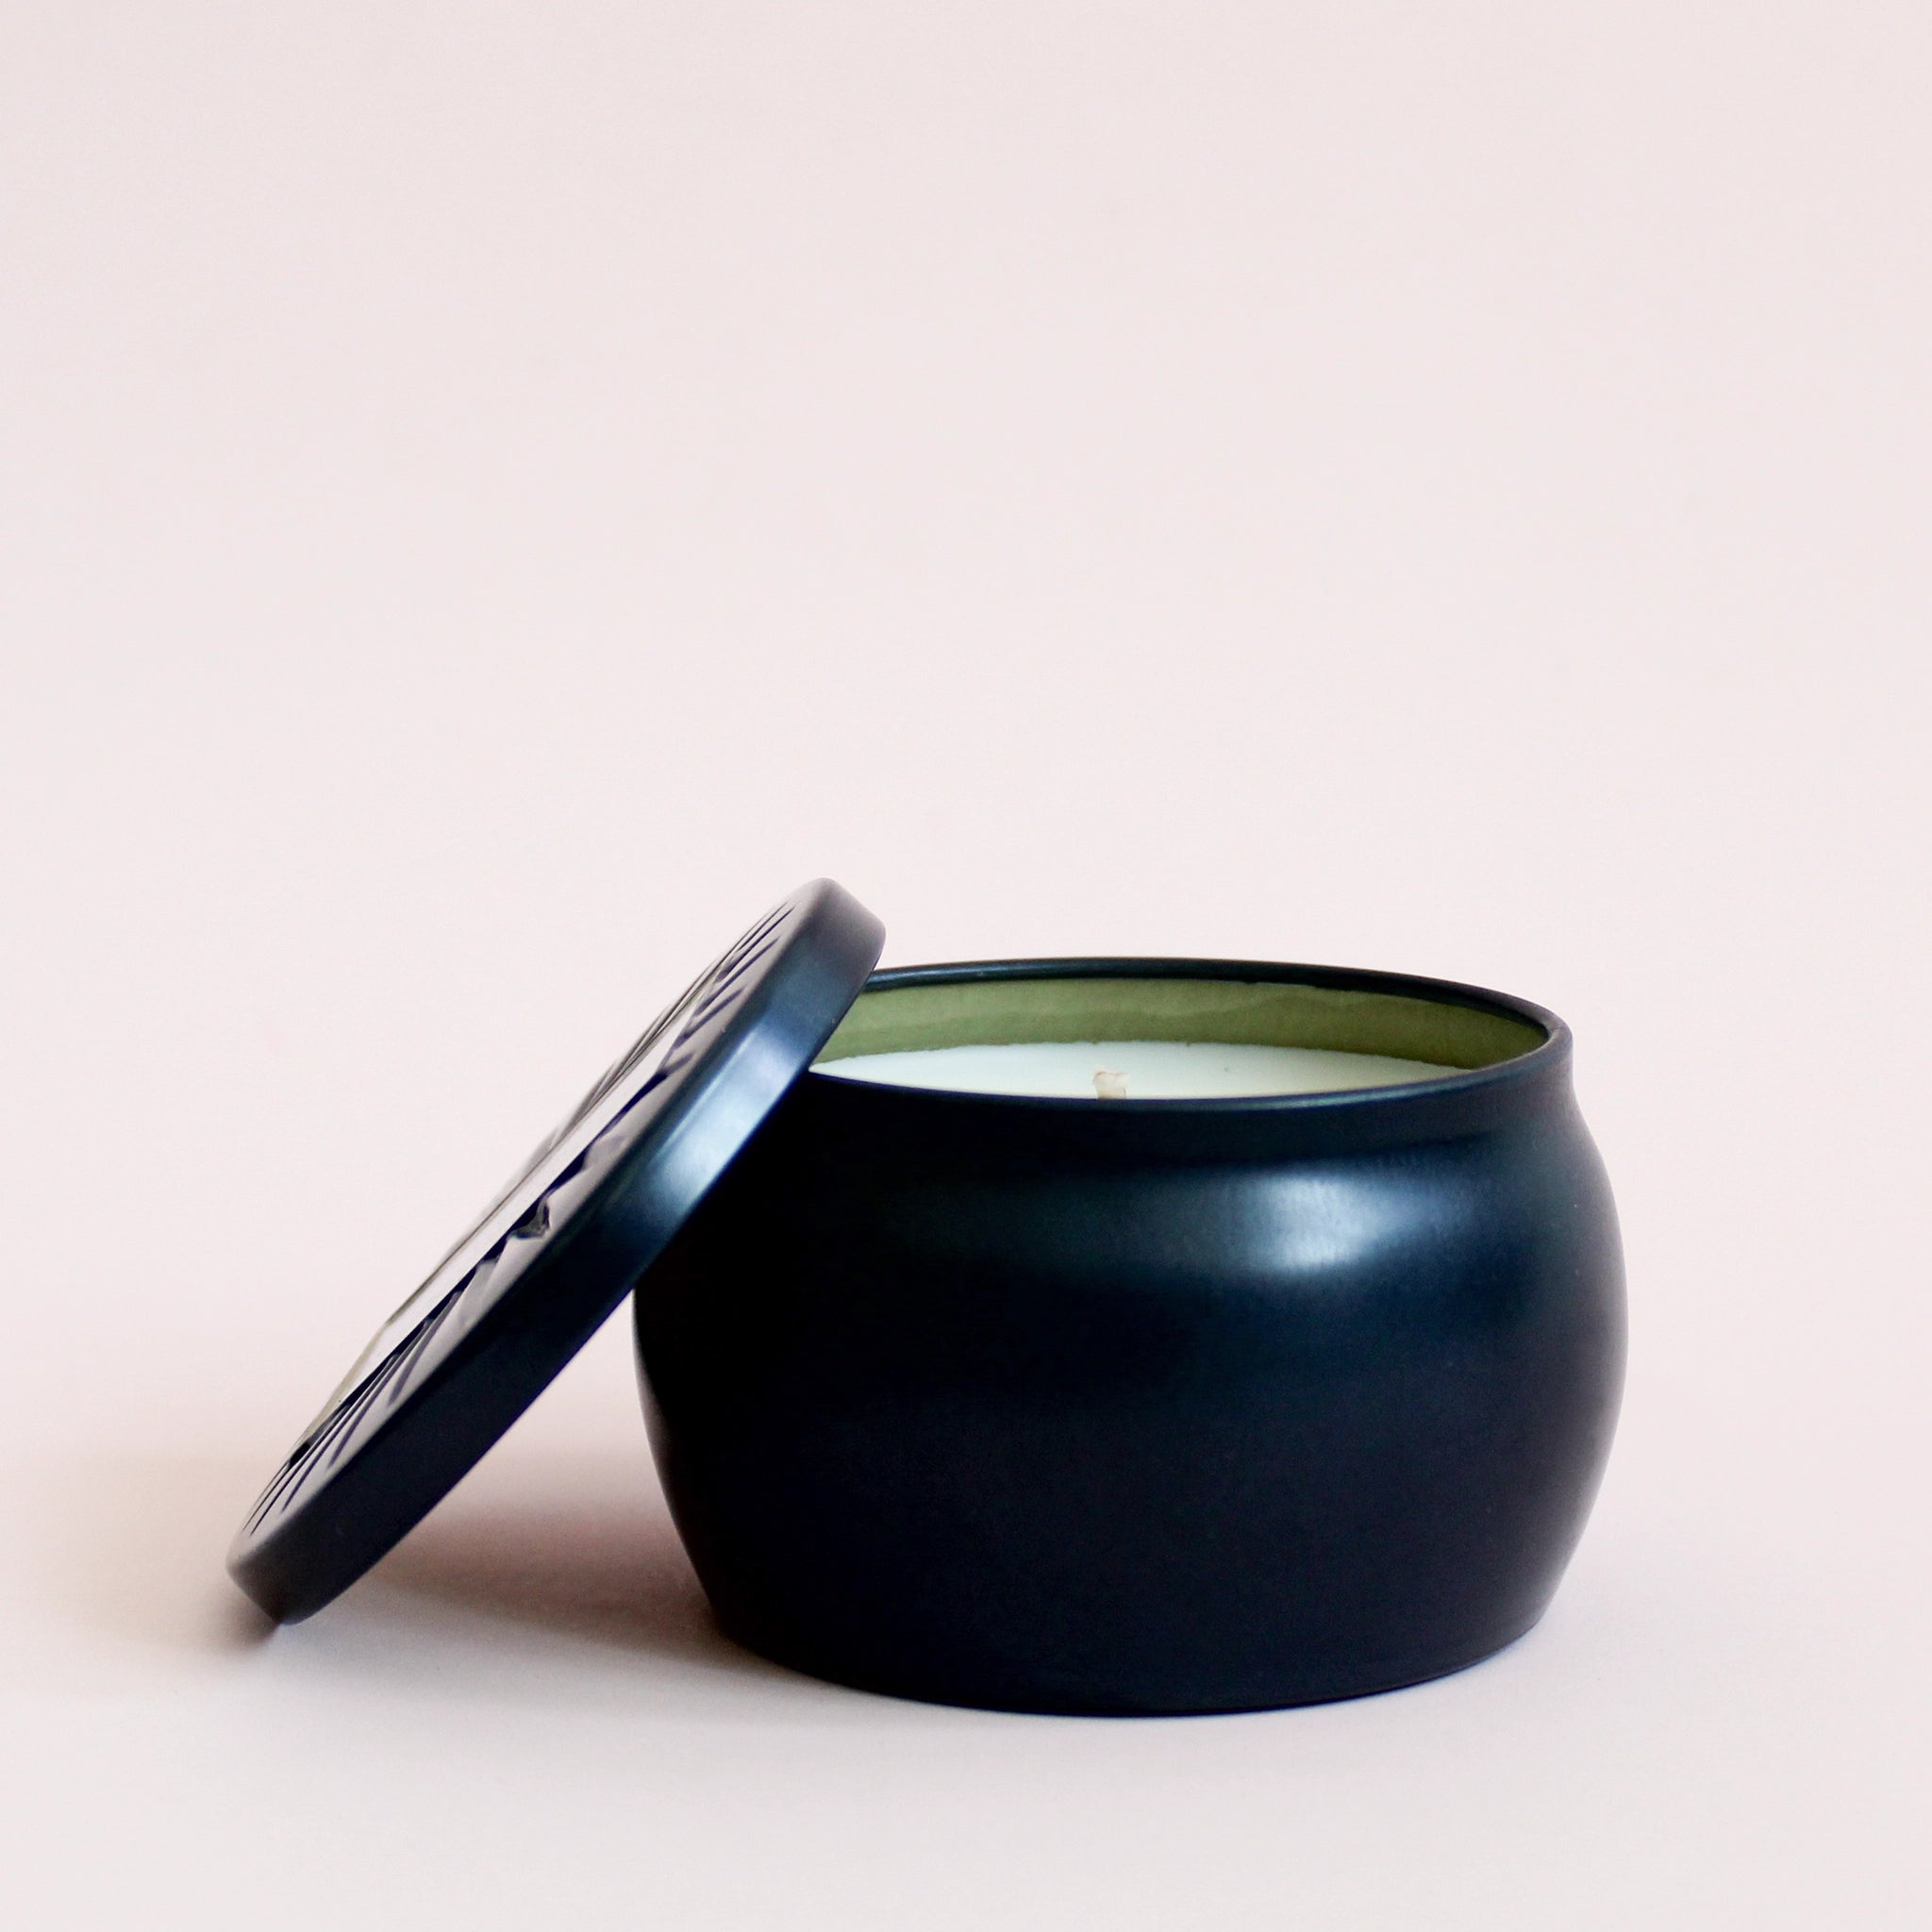 On a cream background is a round tin single wick candle in a navy blue shade along with a label on the lid that reads, "Voluspa Makassar Ebony & Peach".